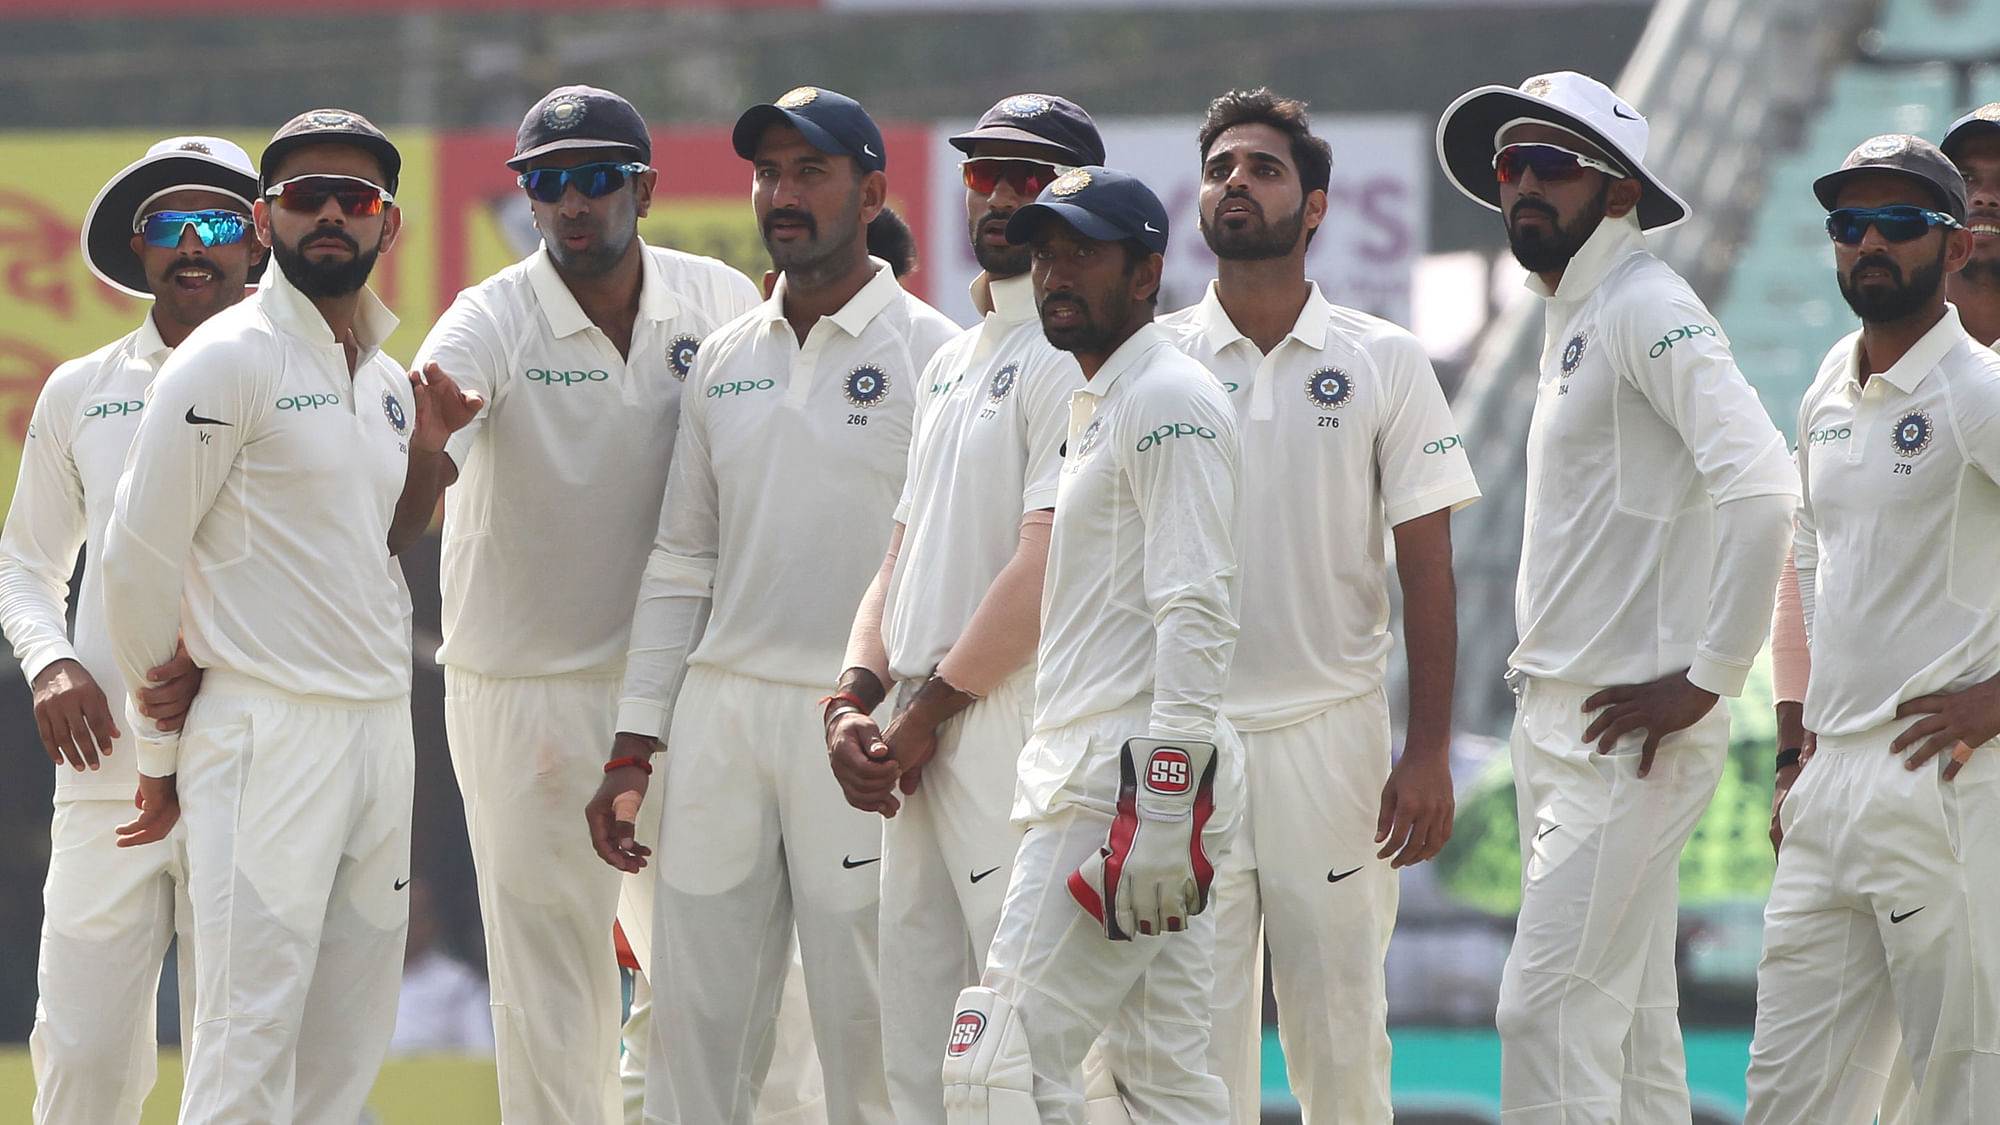 India are playing Sri Lanka in the first Test at Kolkata.